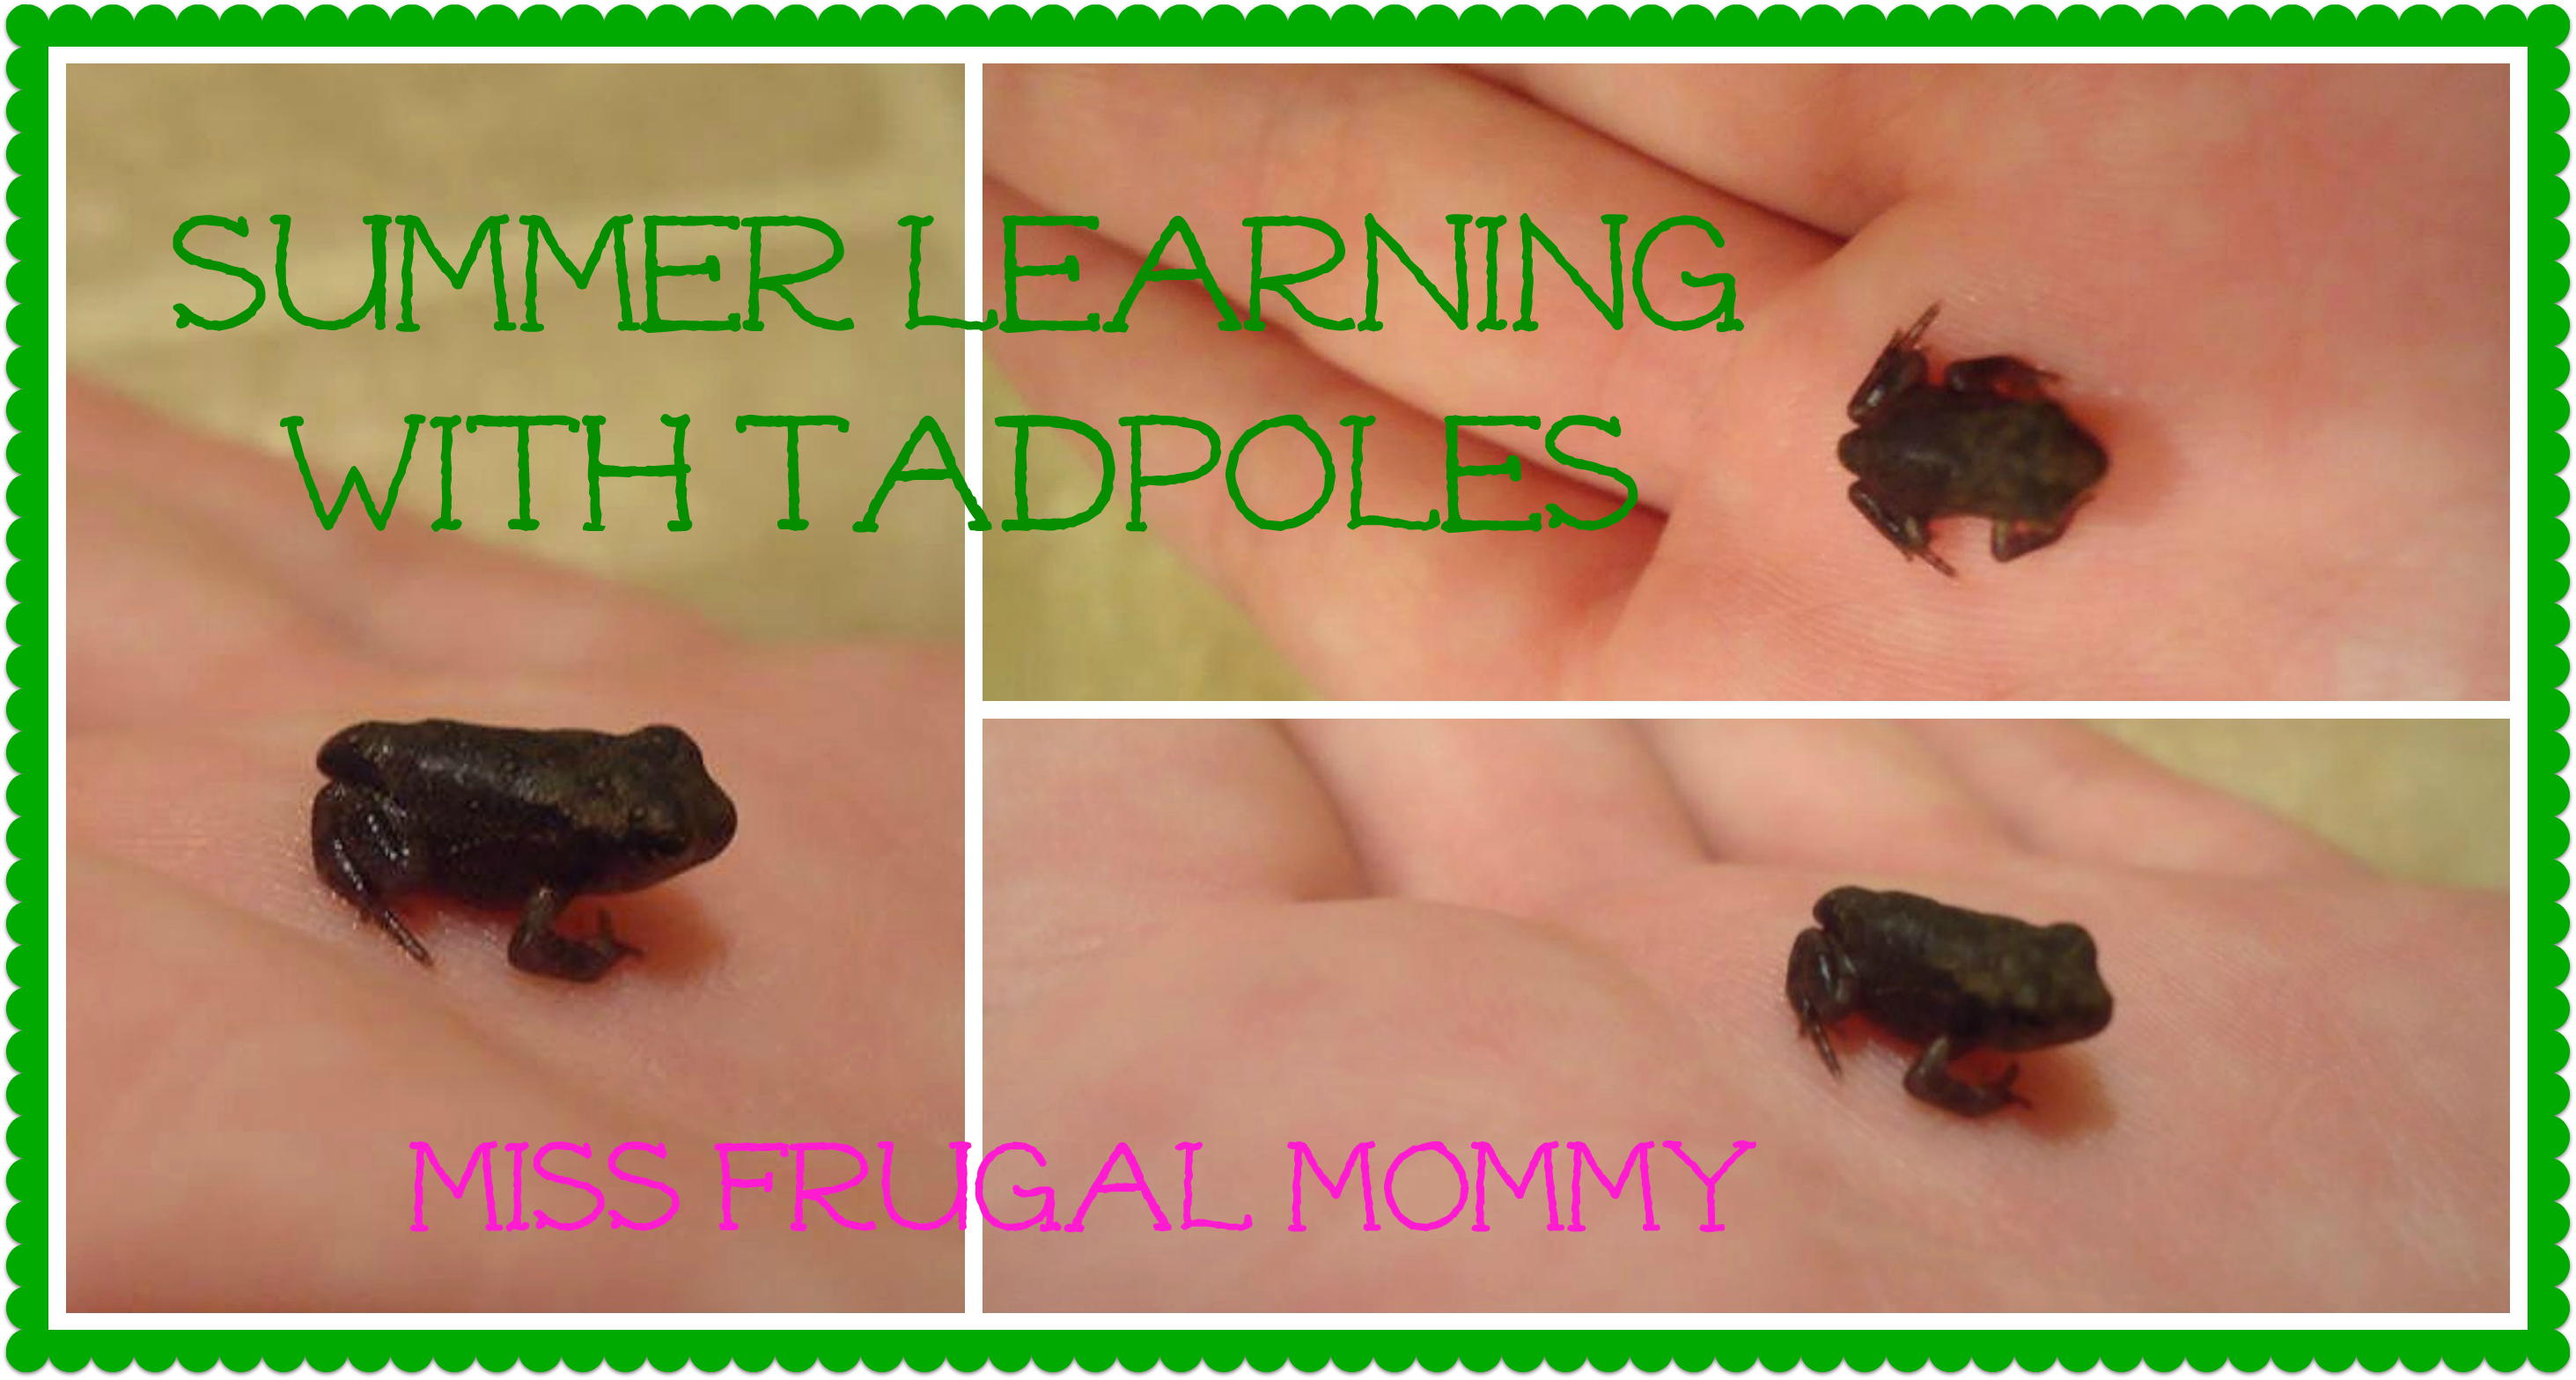 Summer Learning: Growing Tadpoles (Post 3)